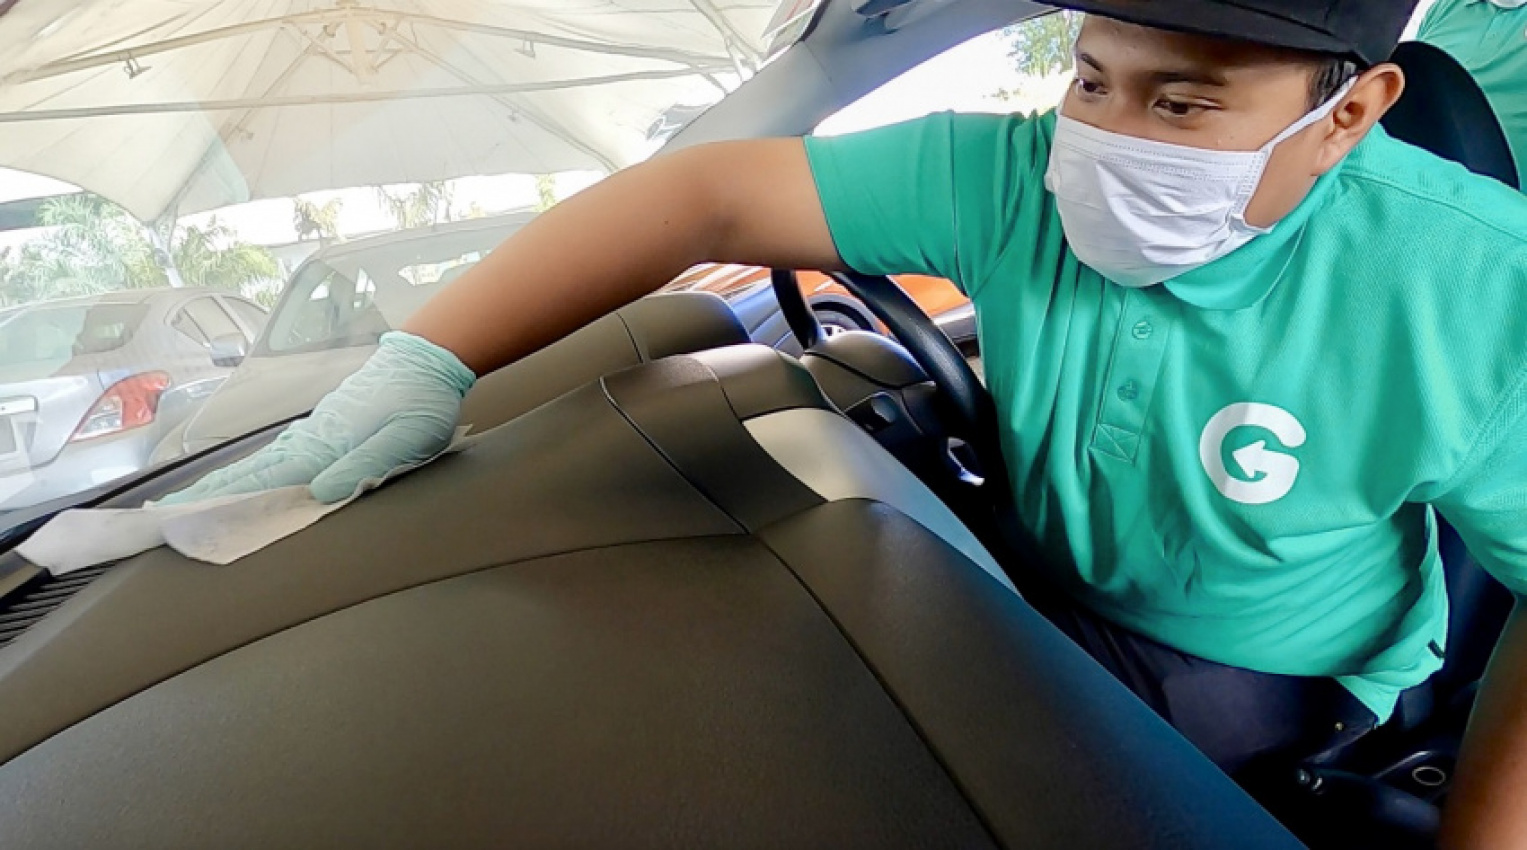 autos, cars, commercial vehicles, automotive, car sharing, cars, cleanliness, disinfectant, gocar, gocar malaysia, hygiene, malaysia, pandemic, gocar malaysia intensifies car cleaning procedures